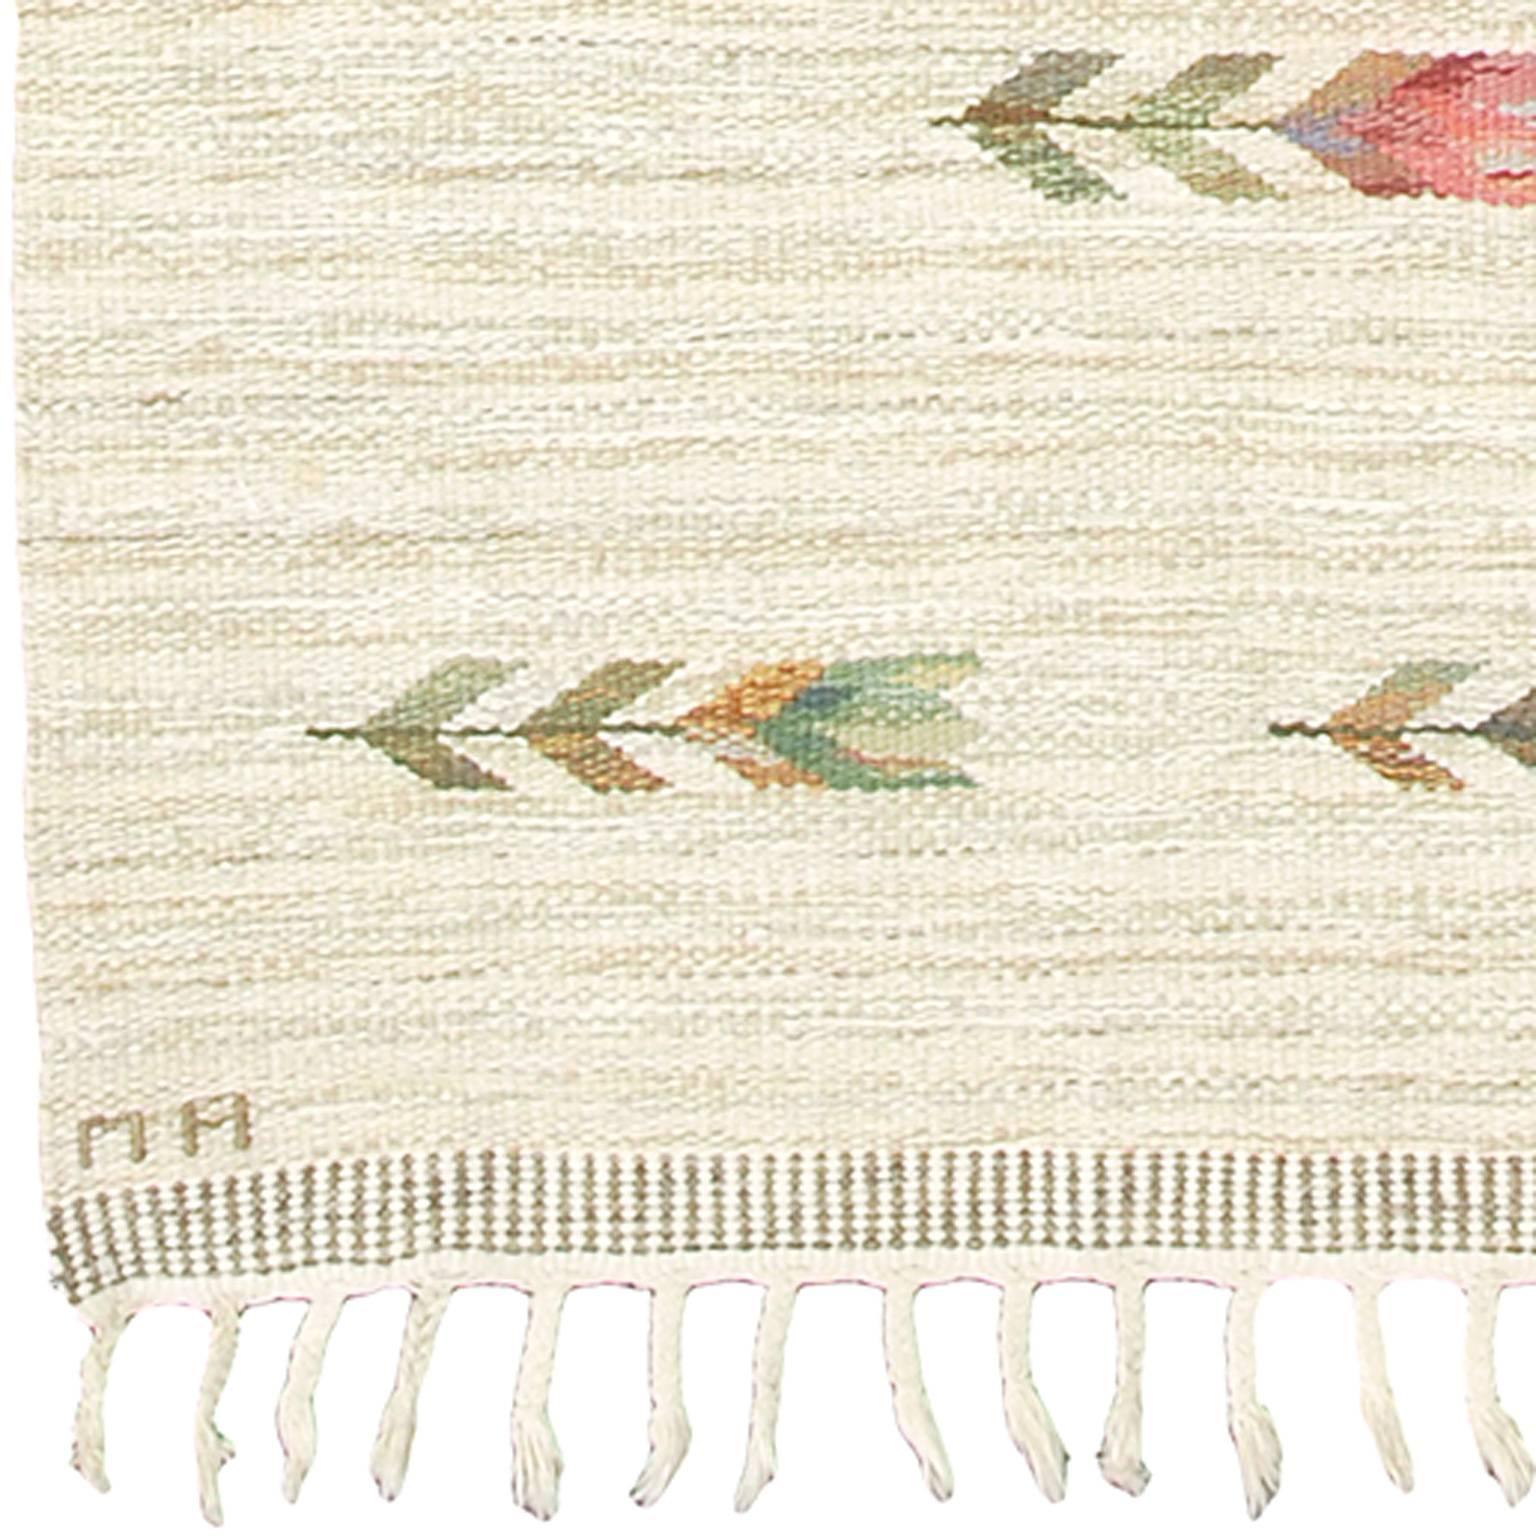 Early 20th Century Swedish Flat Weave Carpet
Sweden, ca. 1900
Handwoven
Initialed: MA